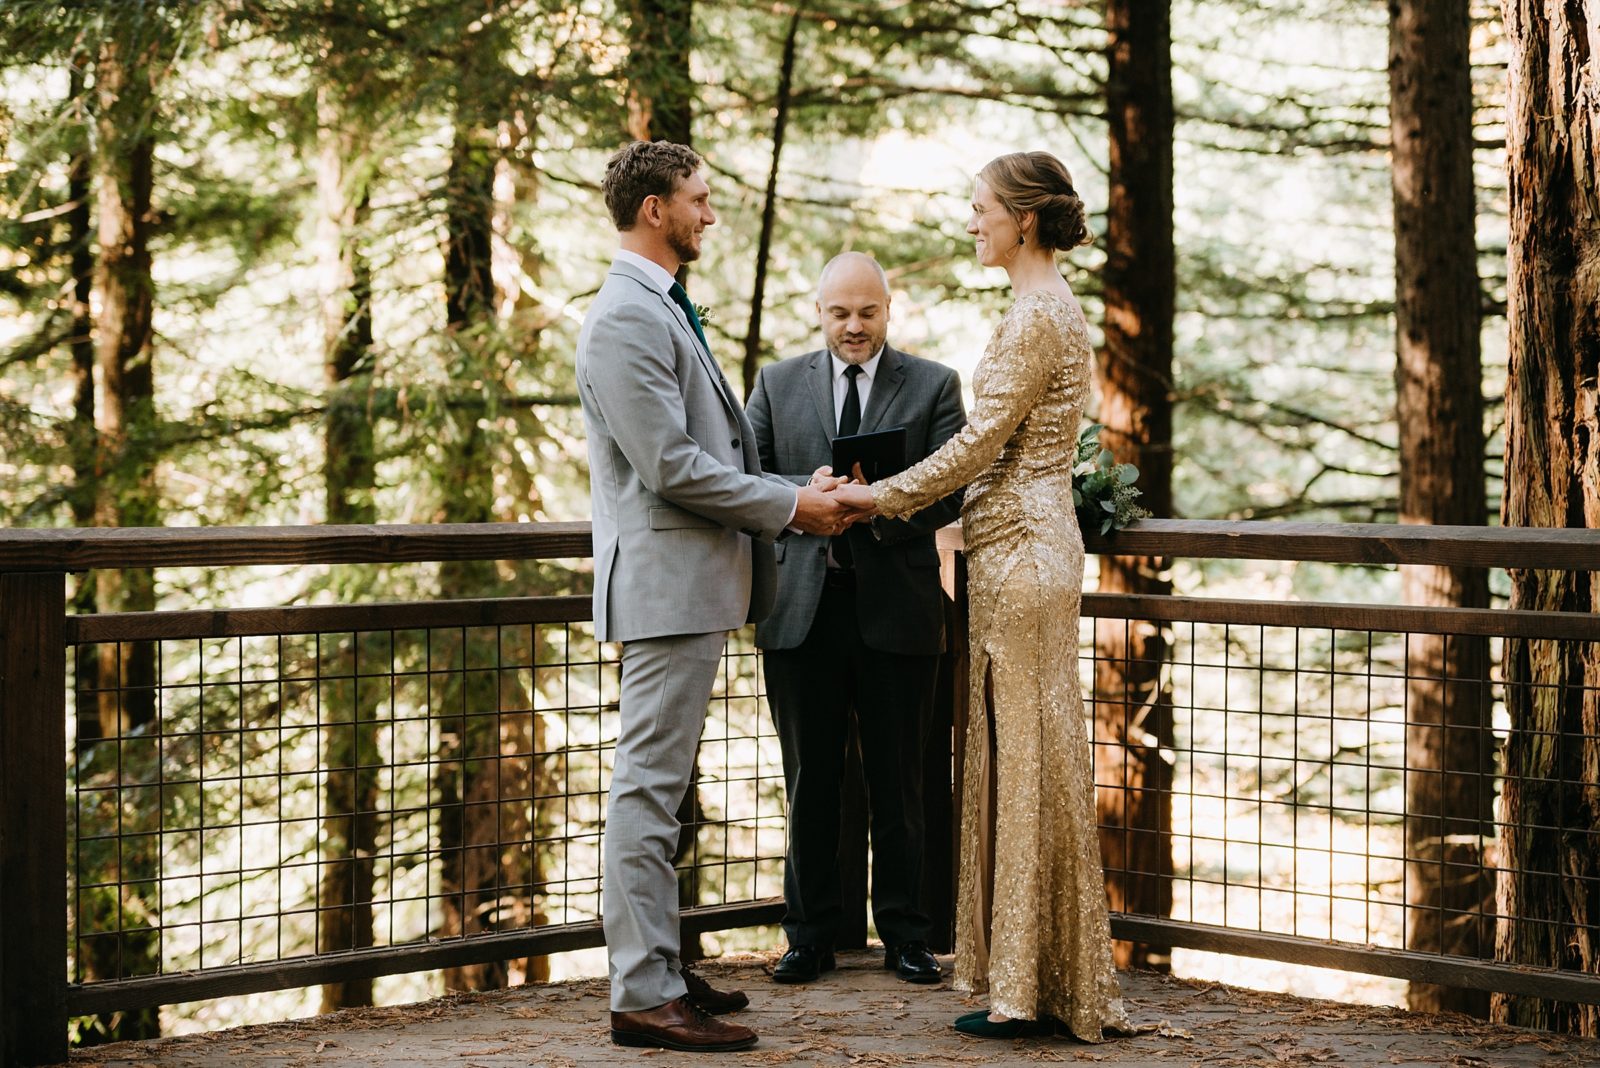 Elopement on the Redwood Deck of Hoyt Arboretum in Portland, Oregon. The bride is wearing an amazing gold, sparkly dress.